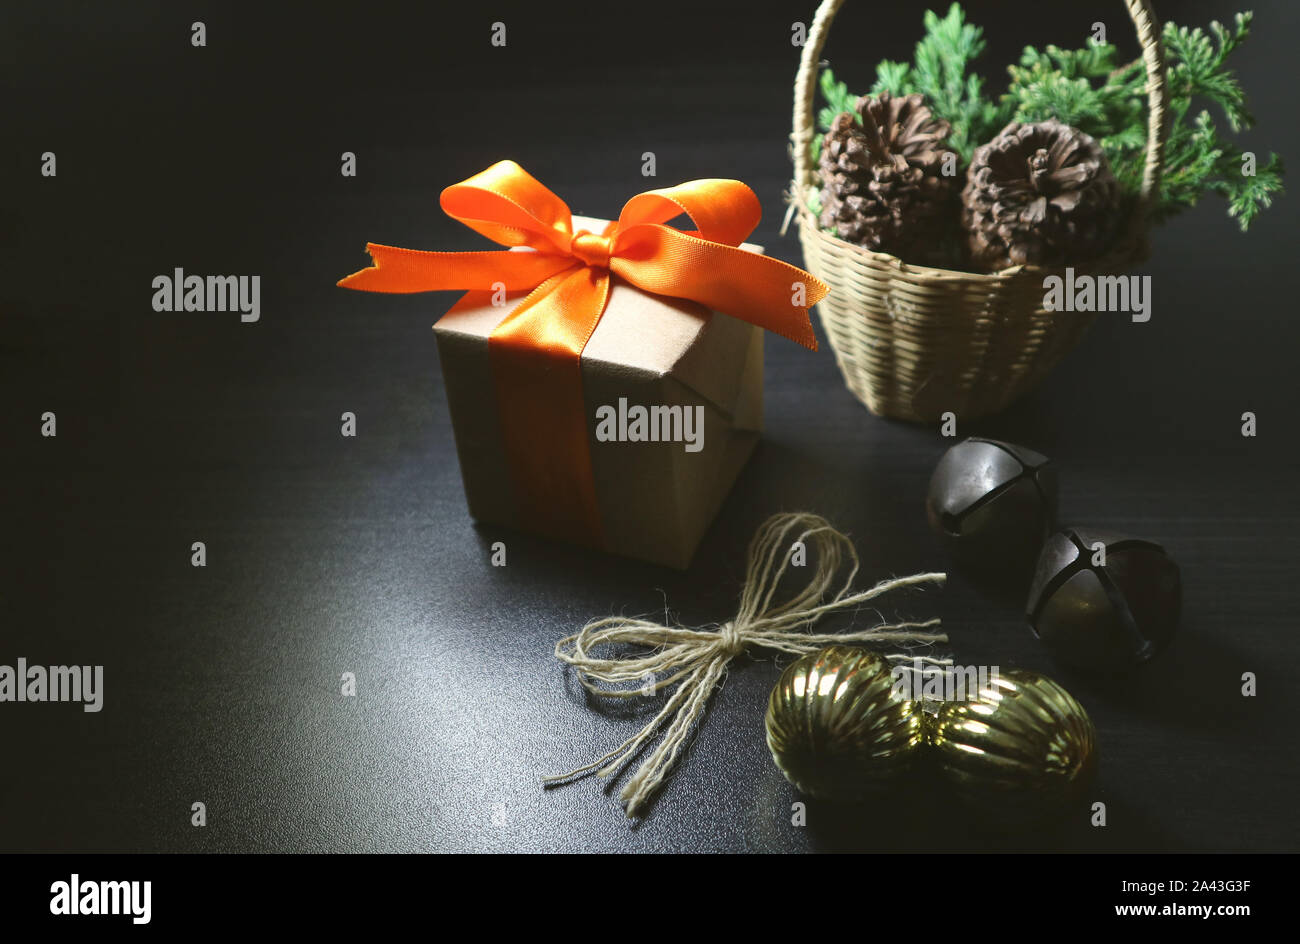 Christmas background. Gift and ornaments on dark background. Space for text. Low key photography. Stock Photo